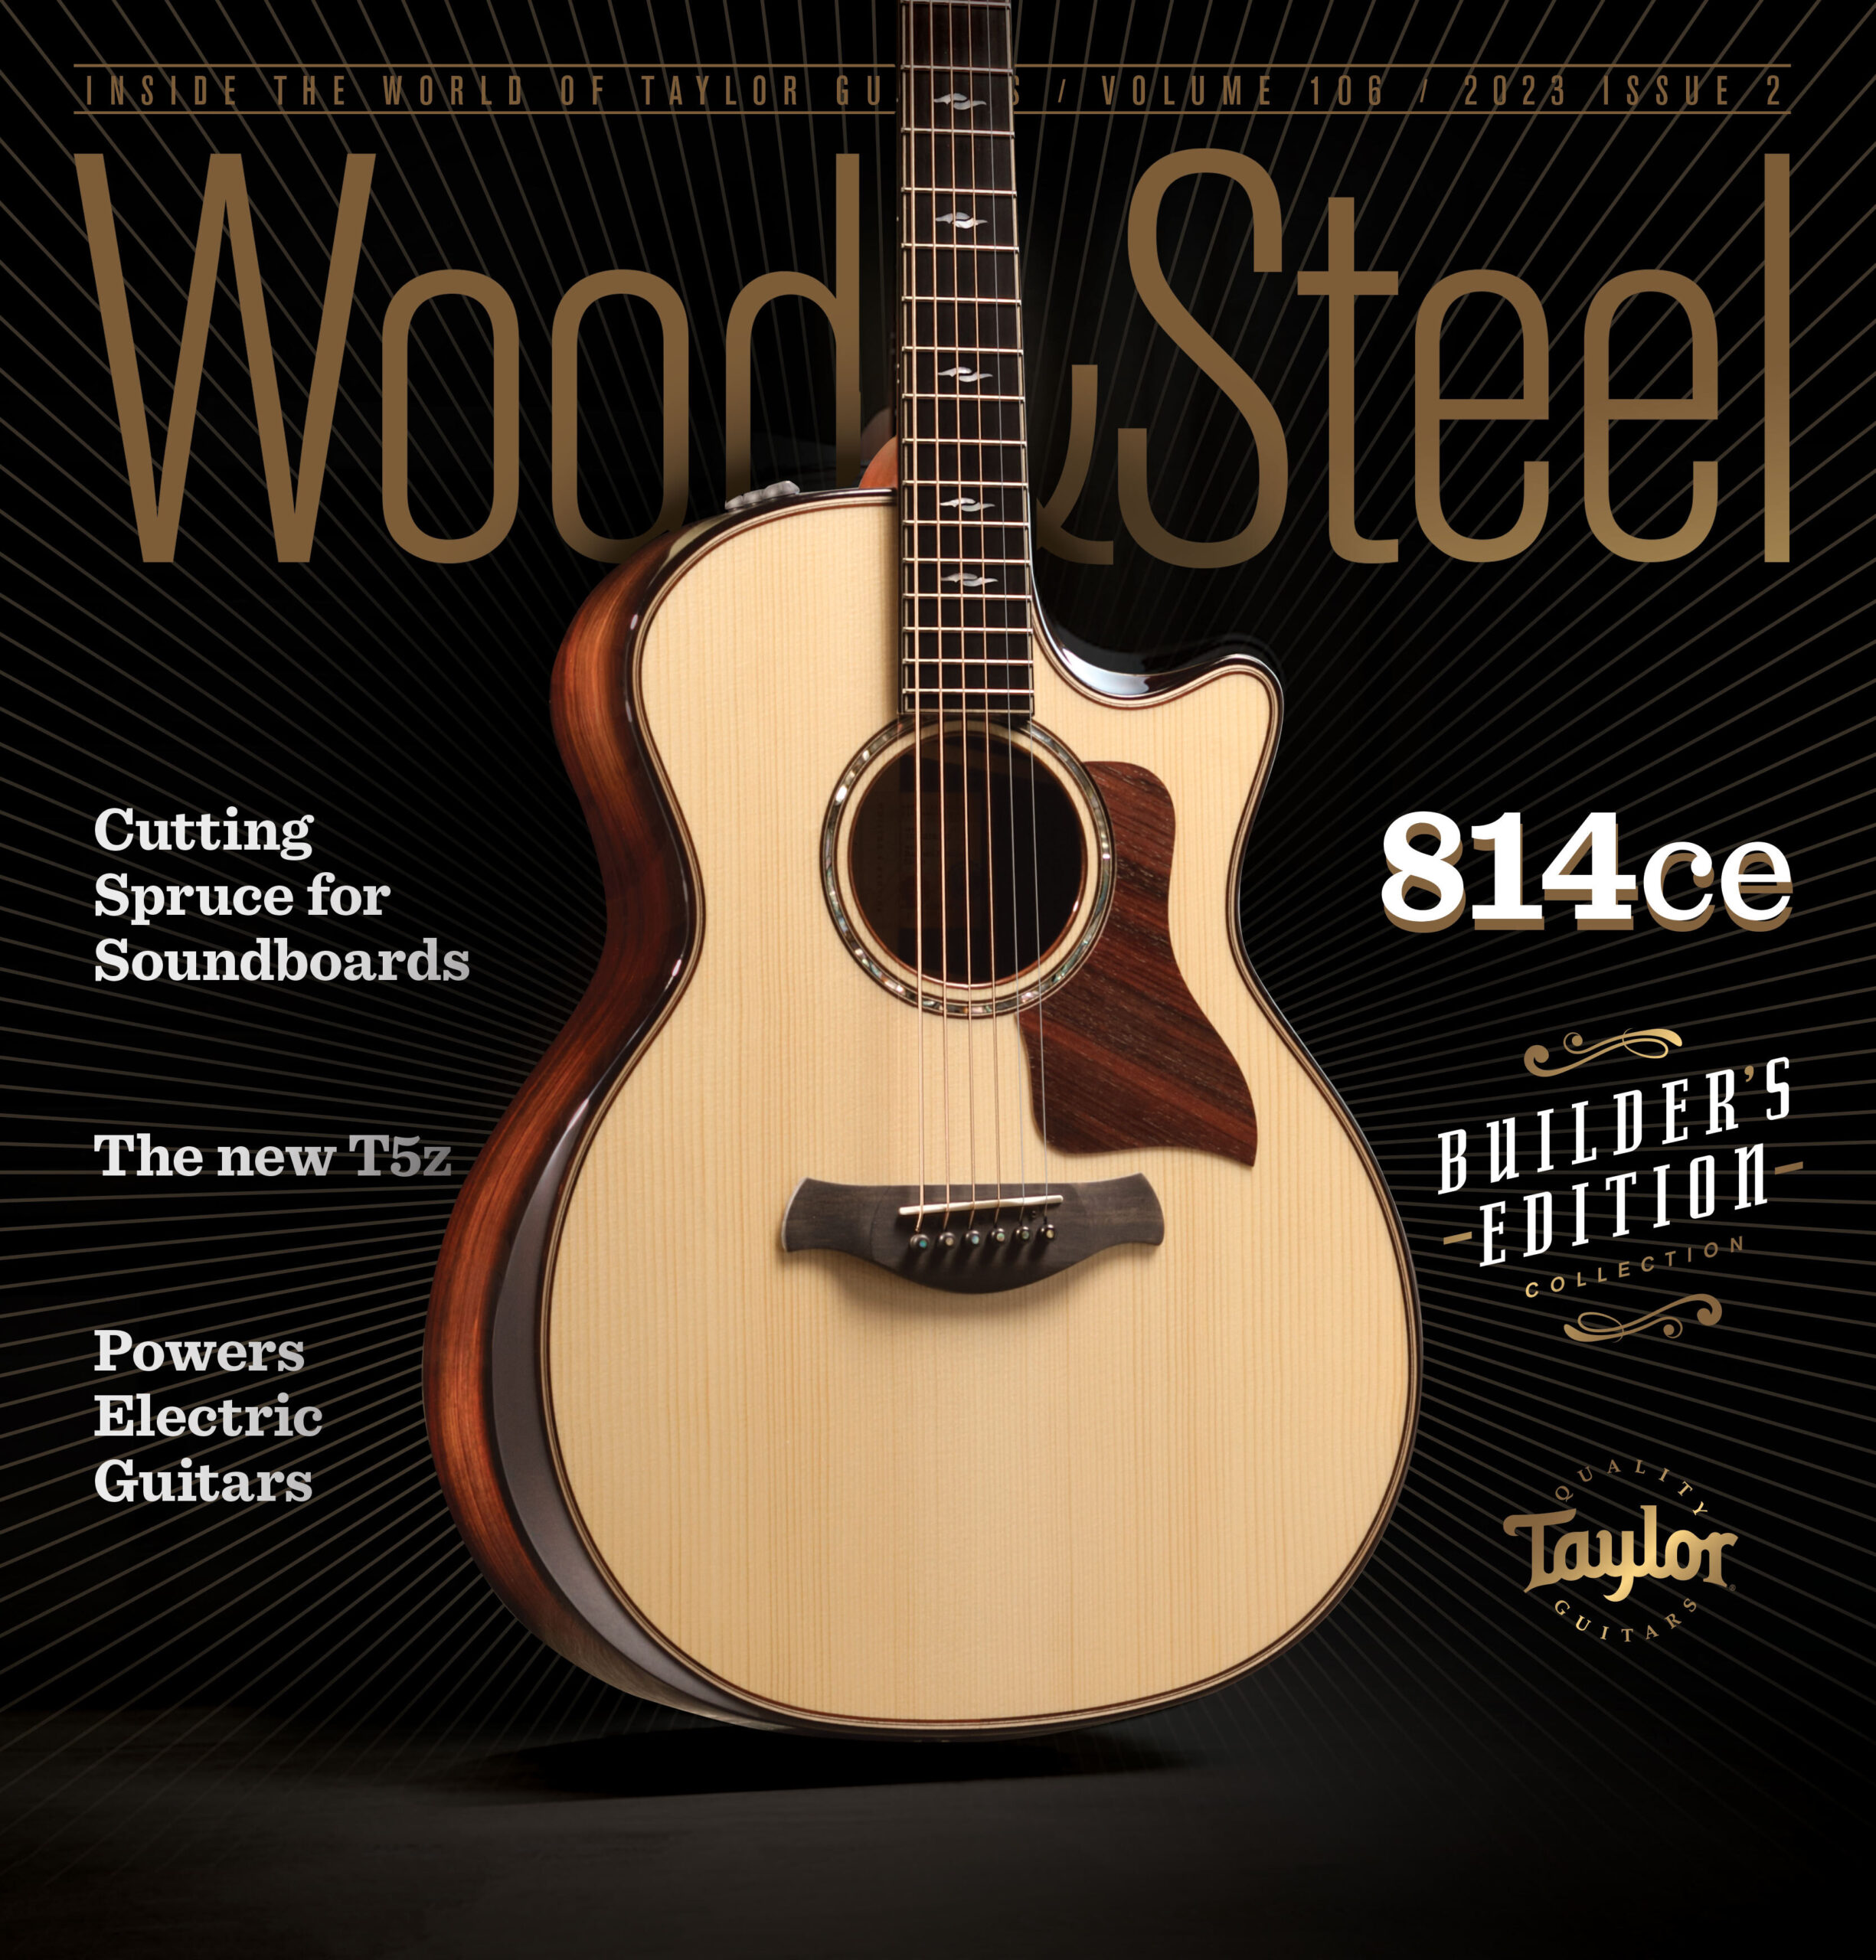 Magazine cover image featuring a Taylor Builder's Edition 814ce acoustic guitar and text introducing other magazine stories in this issue